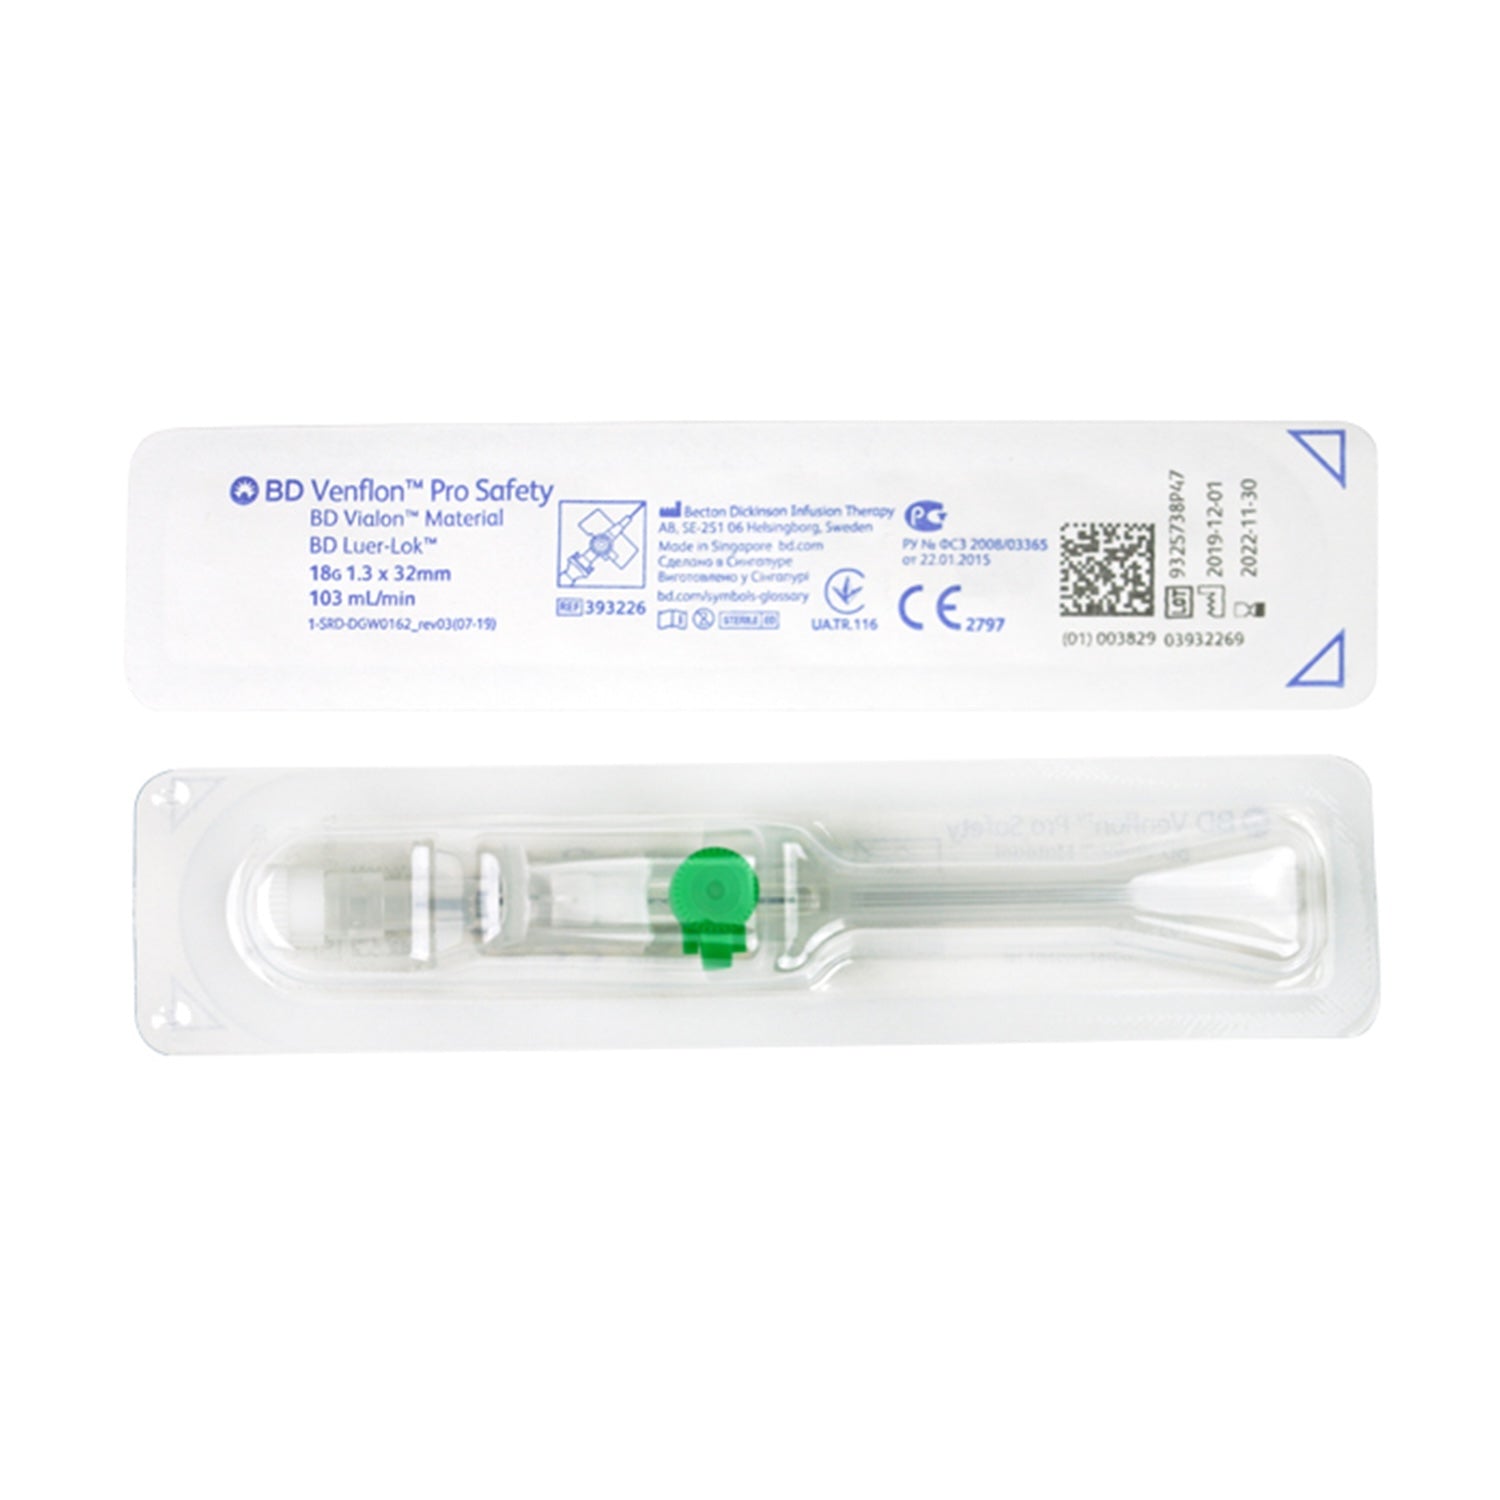 BD Venflon Pro Safety Peripheral IV Cannula with Injection Port | Green | 18G x 32 x 1.3mm | Pack of 50 (1)